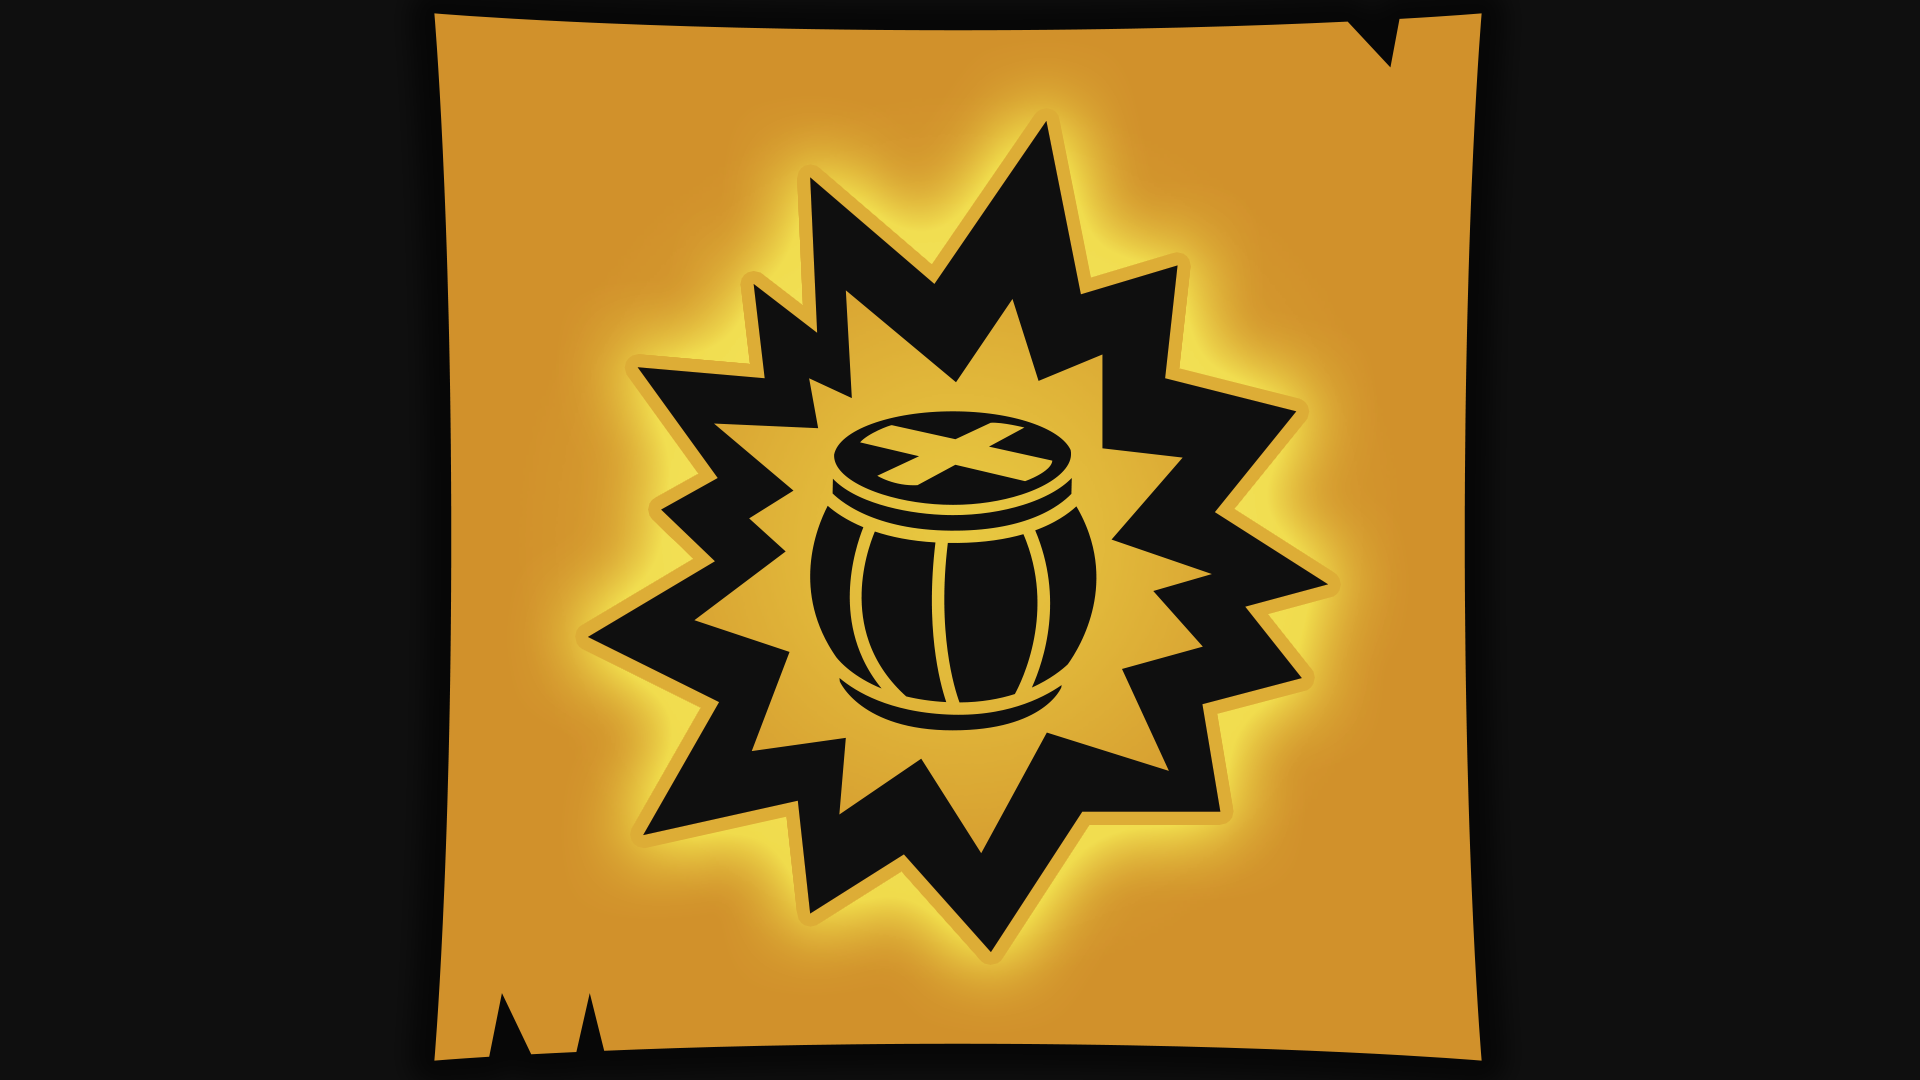 Icon for Get a load of this barrel